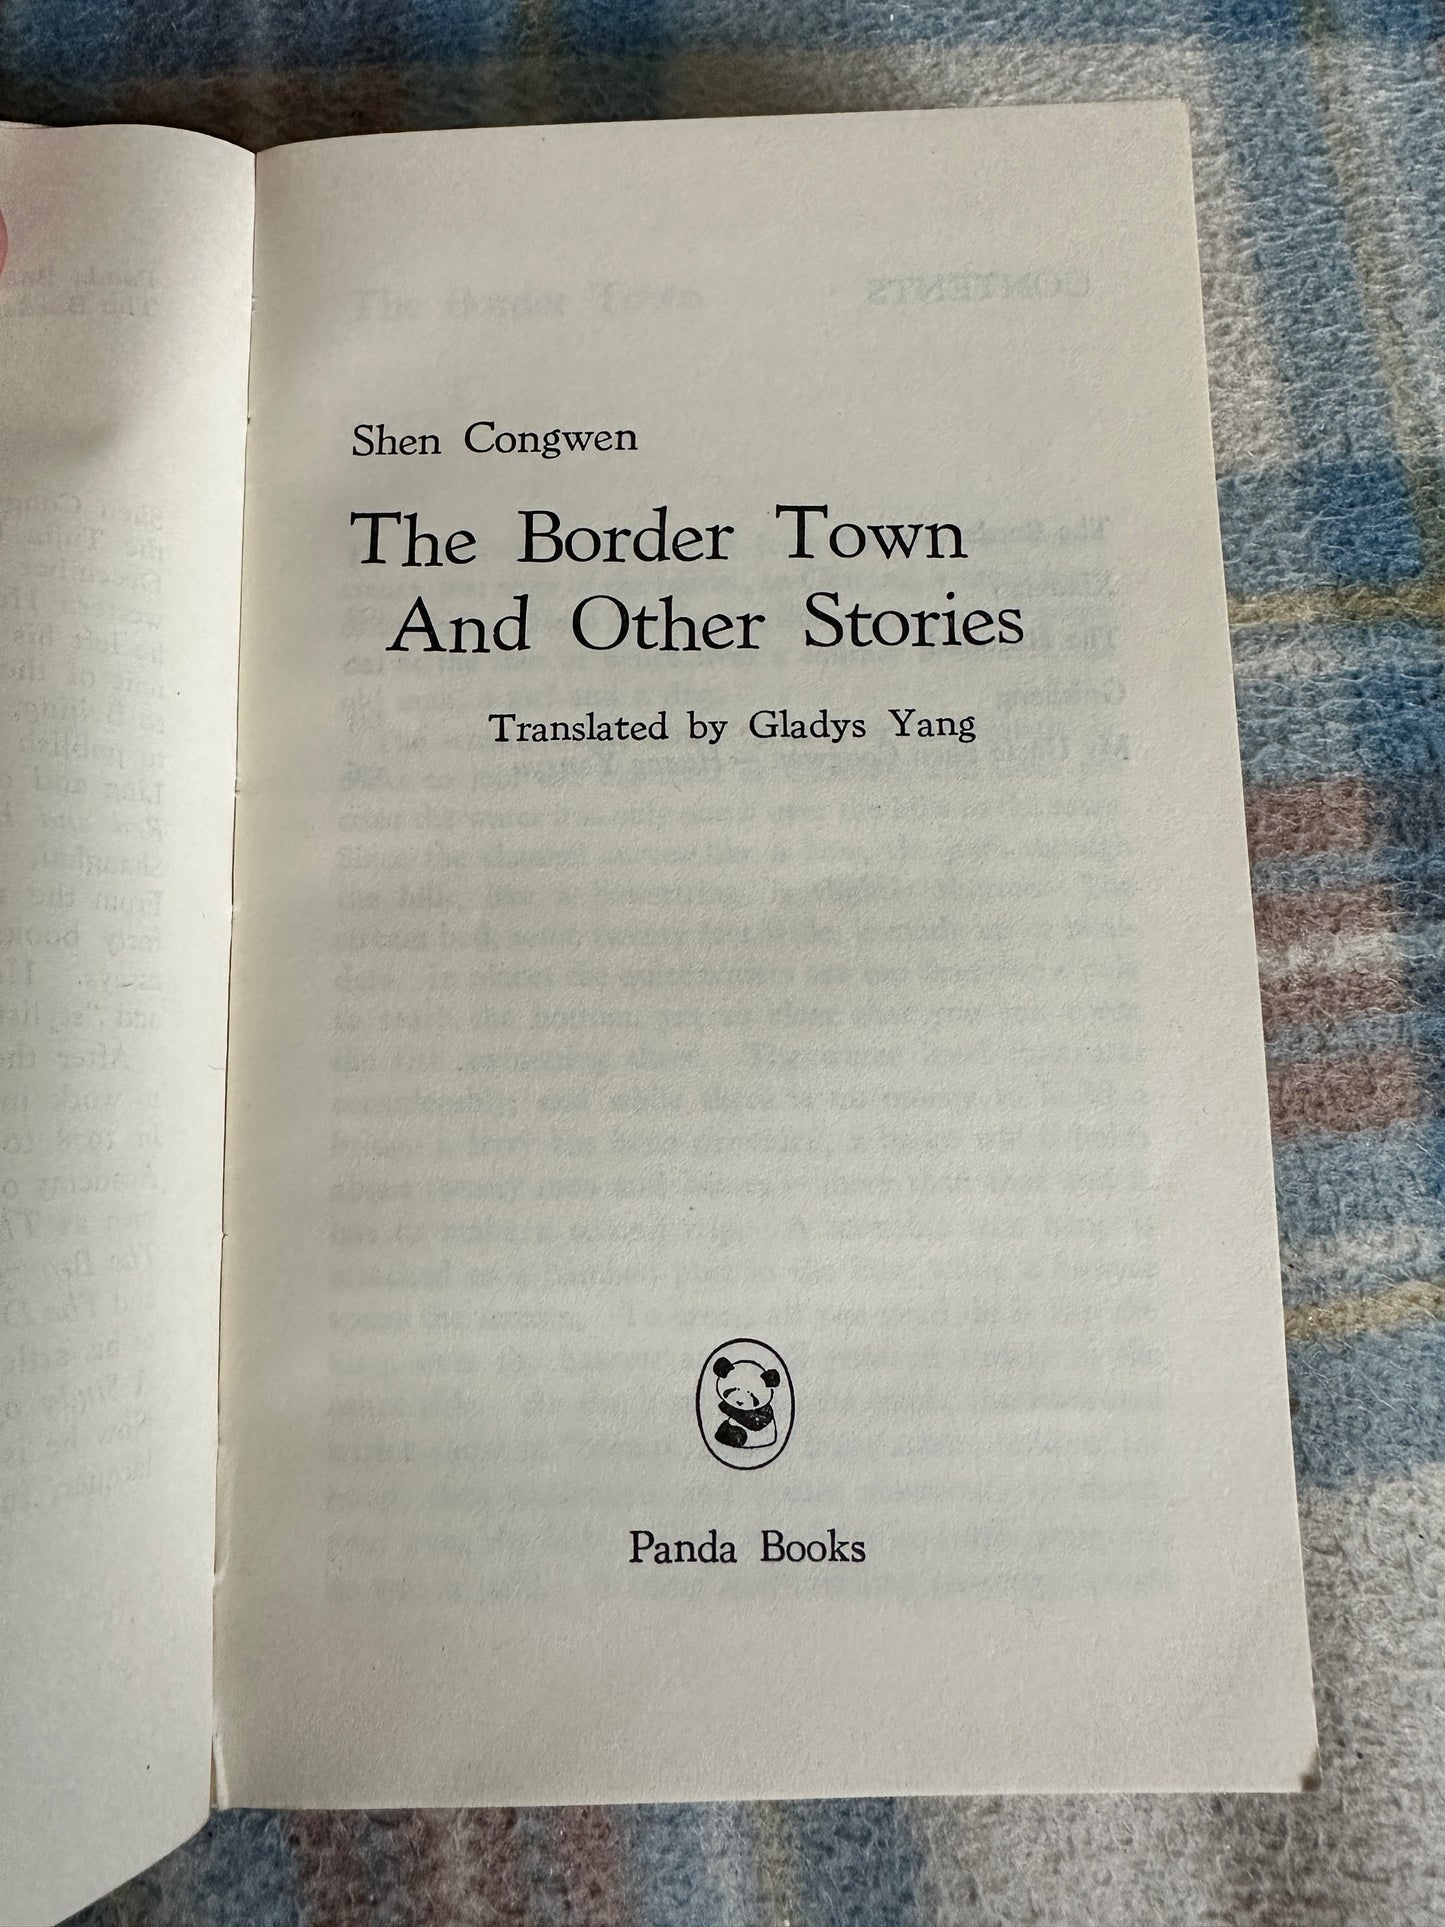 1981*1st* The Border Town & Other Stories - Shen Congwen(Panda Books) translated Gladys Yang